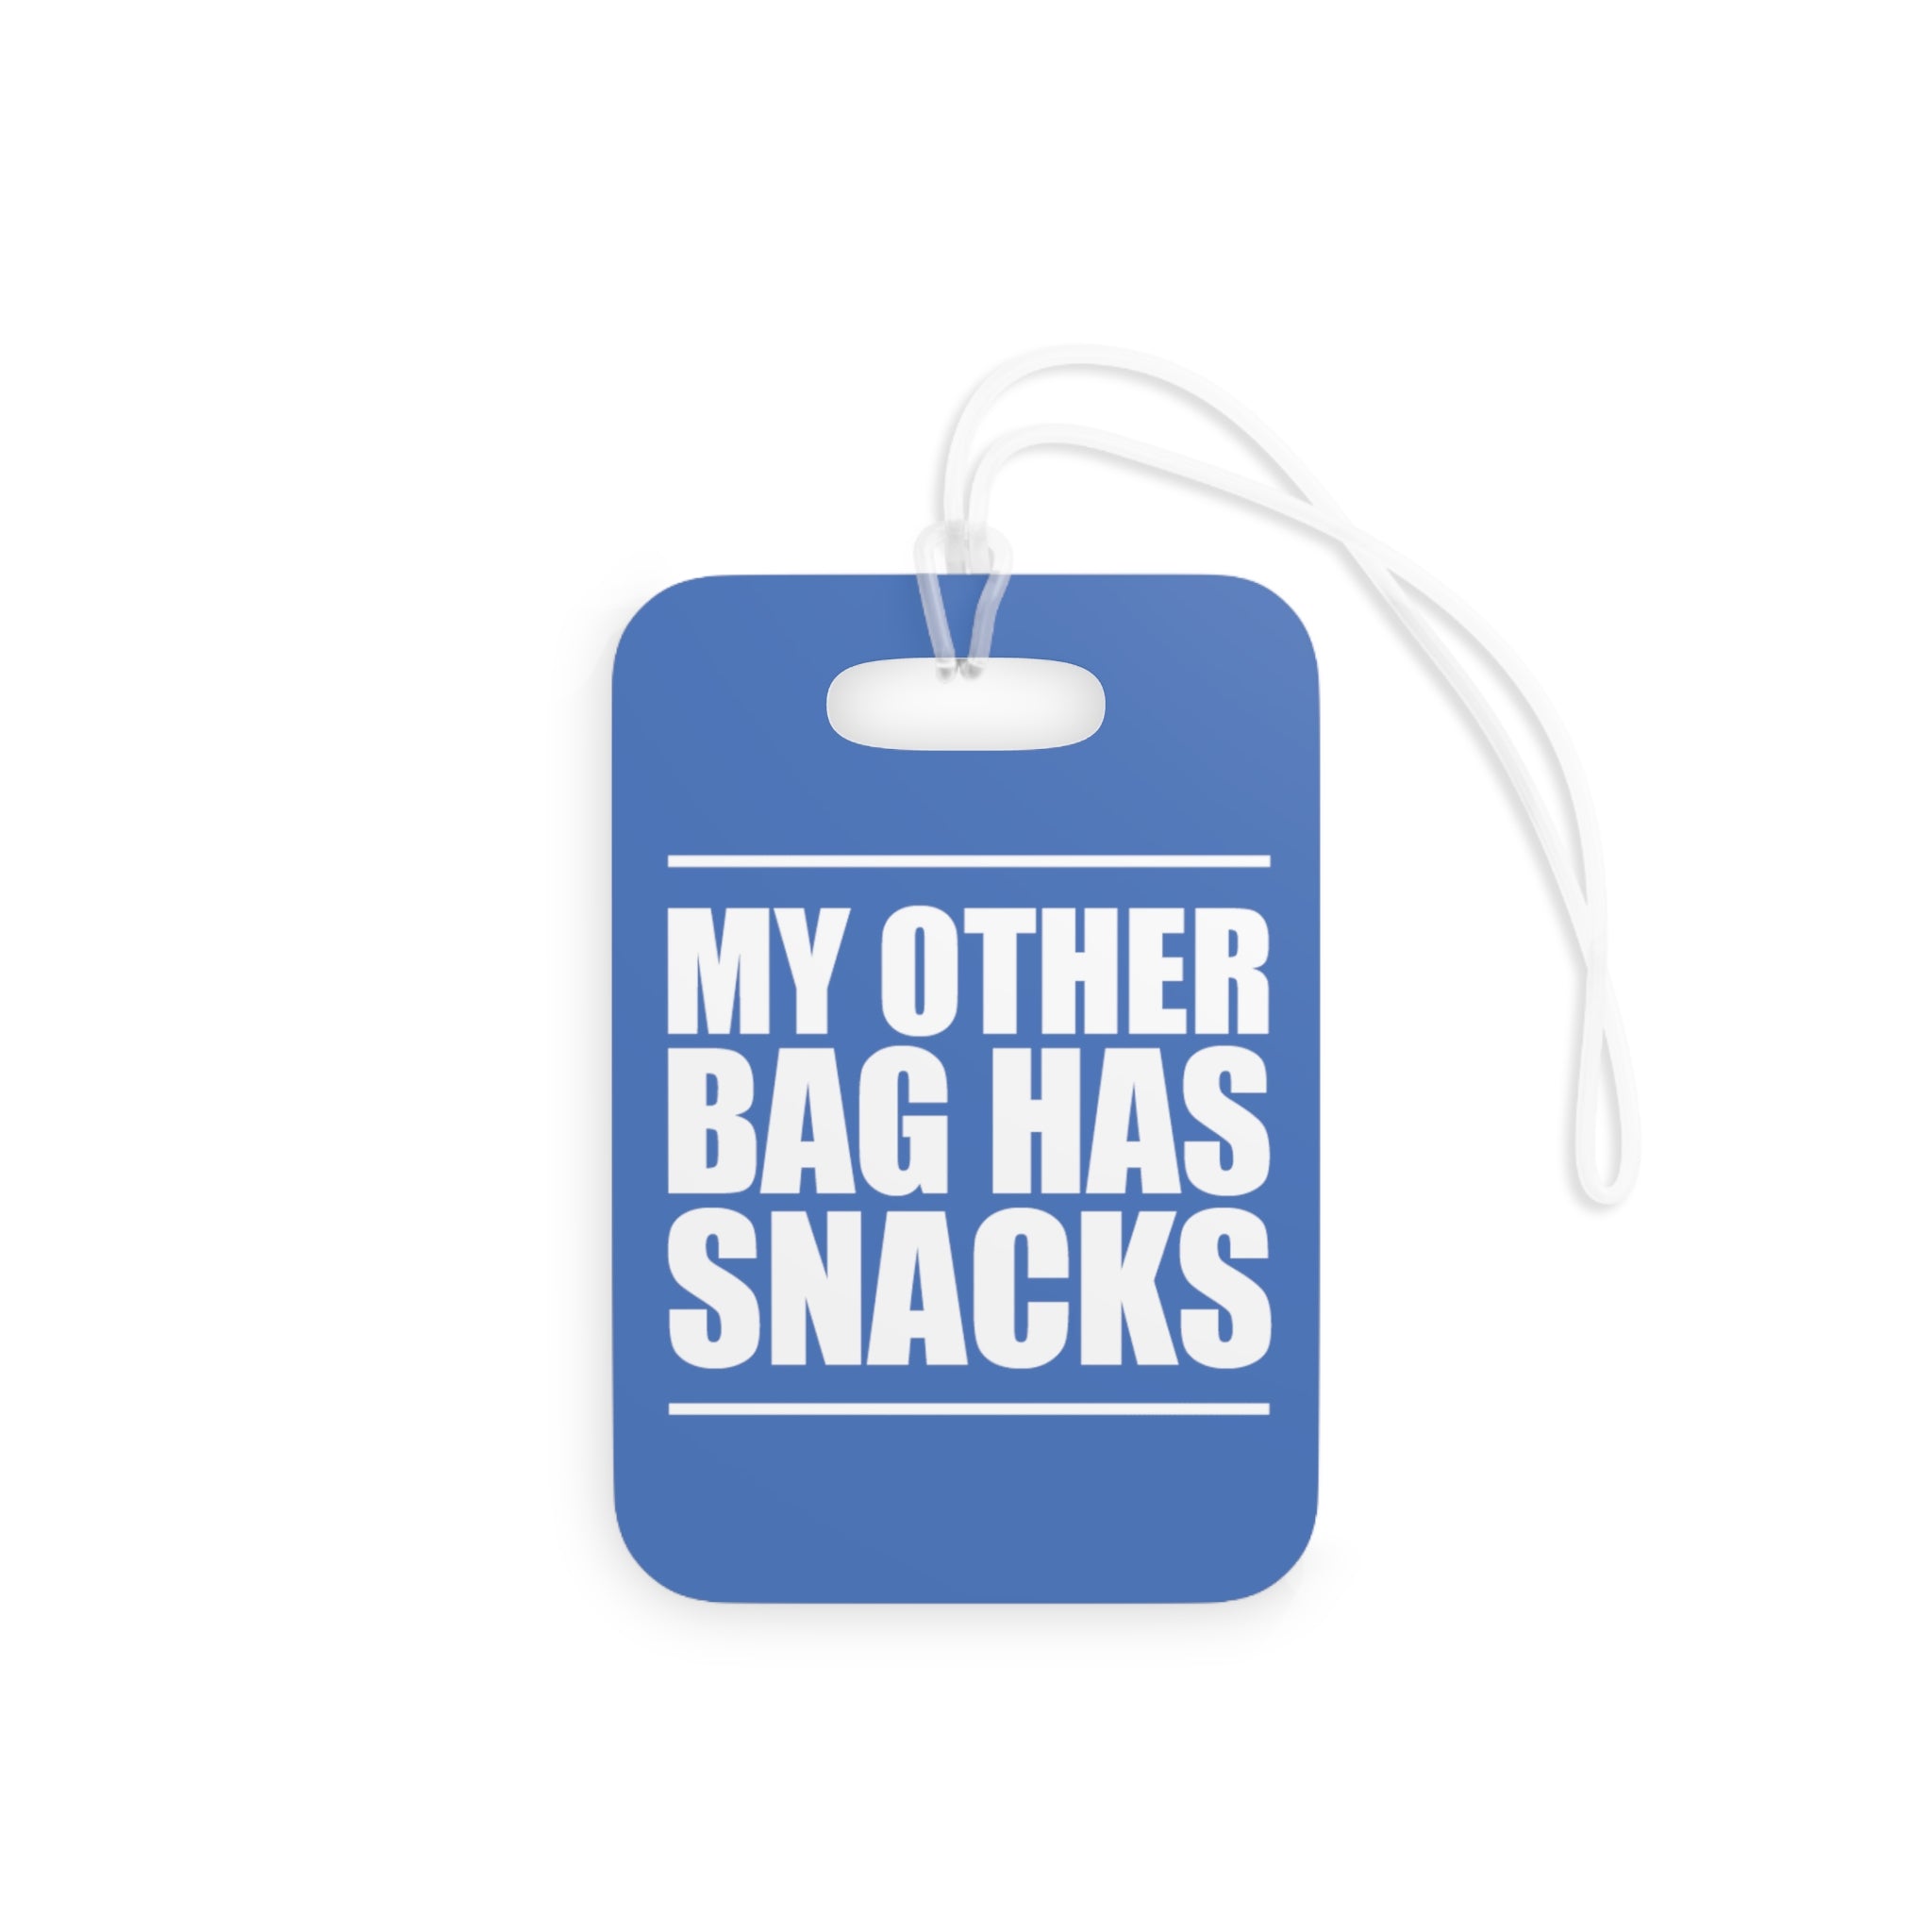 My other bag has snacks Luggage Tag (Blue)